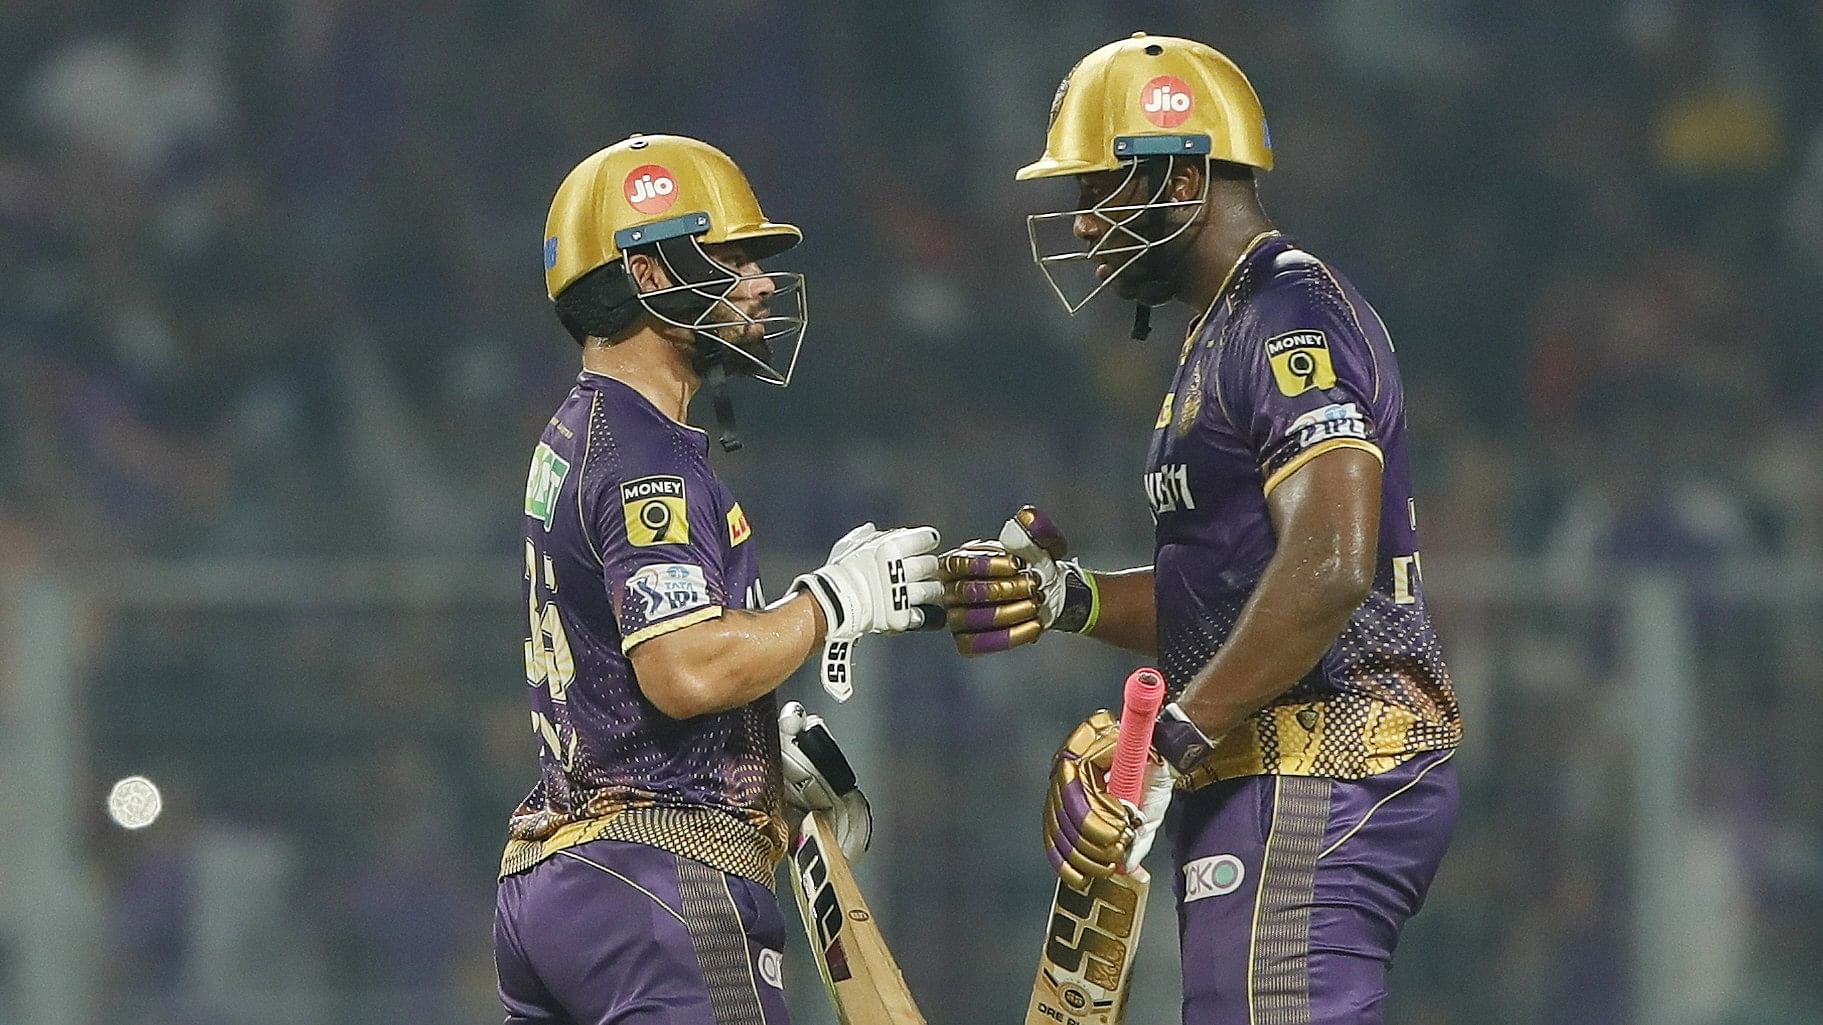 <div class="paragraphs"><p>Andre Russell and Rinku singh during the match against Punjab Kings</p></div>